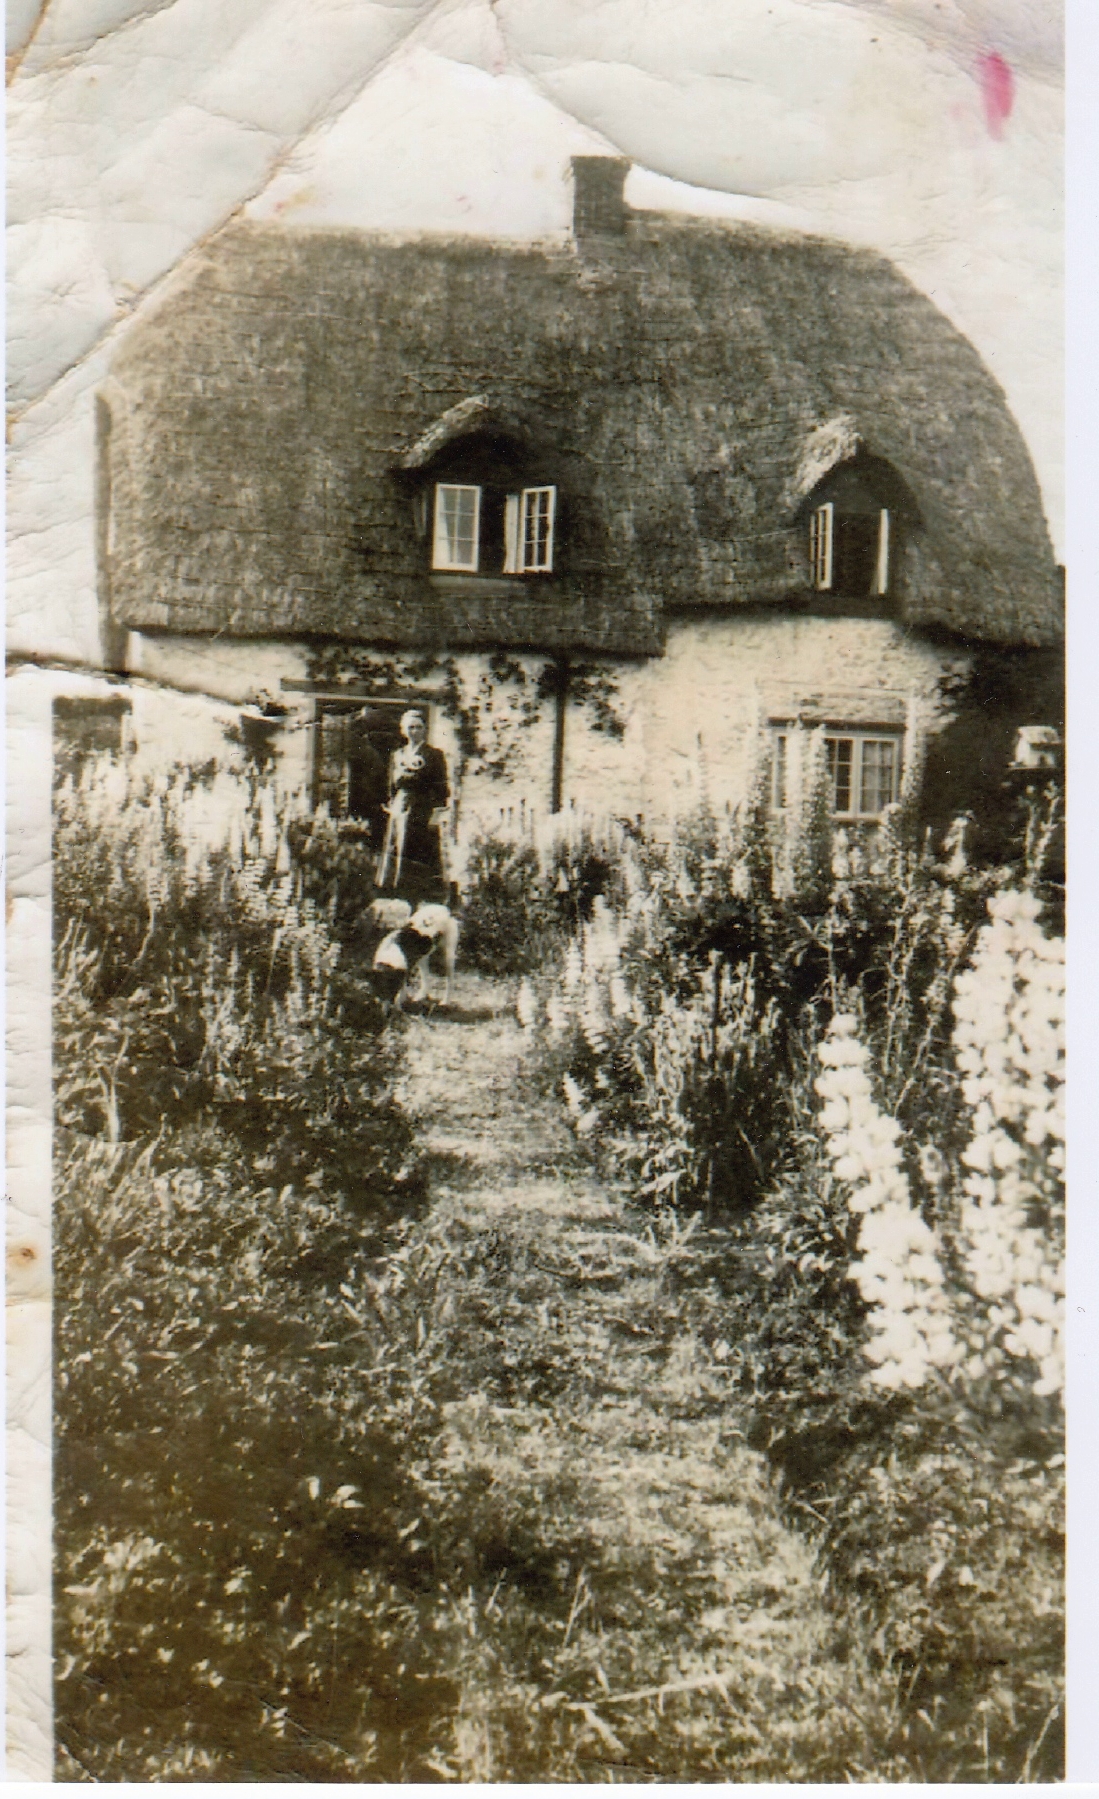 May Tree Cottage in 1938/9, the possession of the Kindertransport Girl